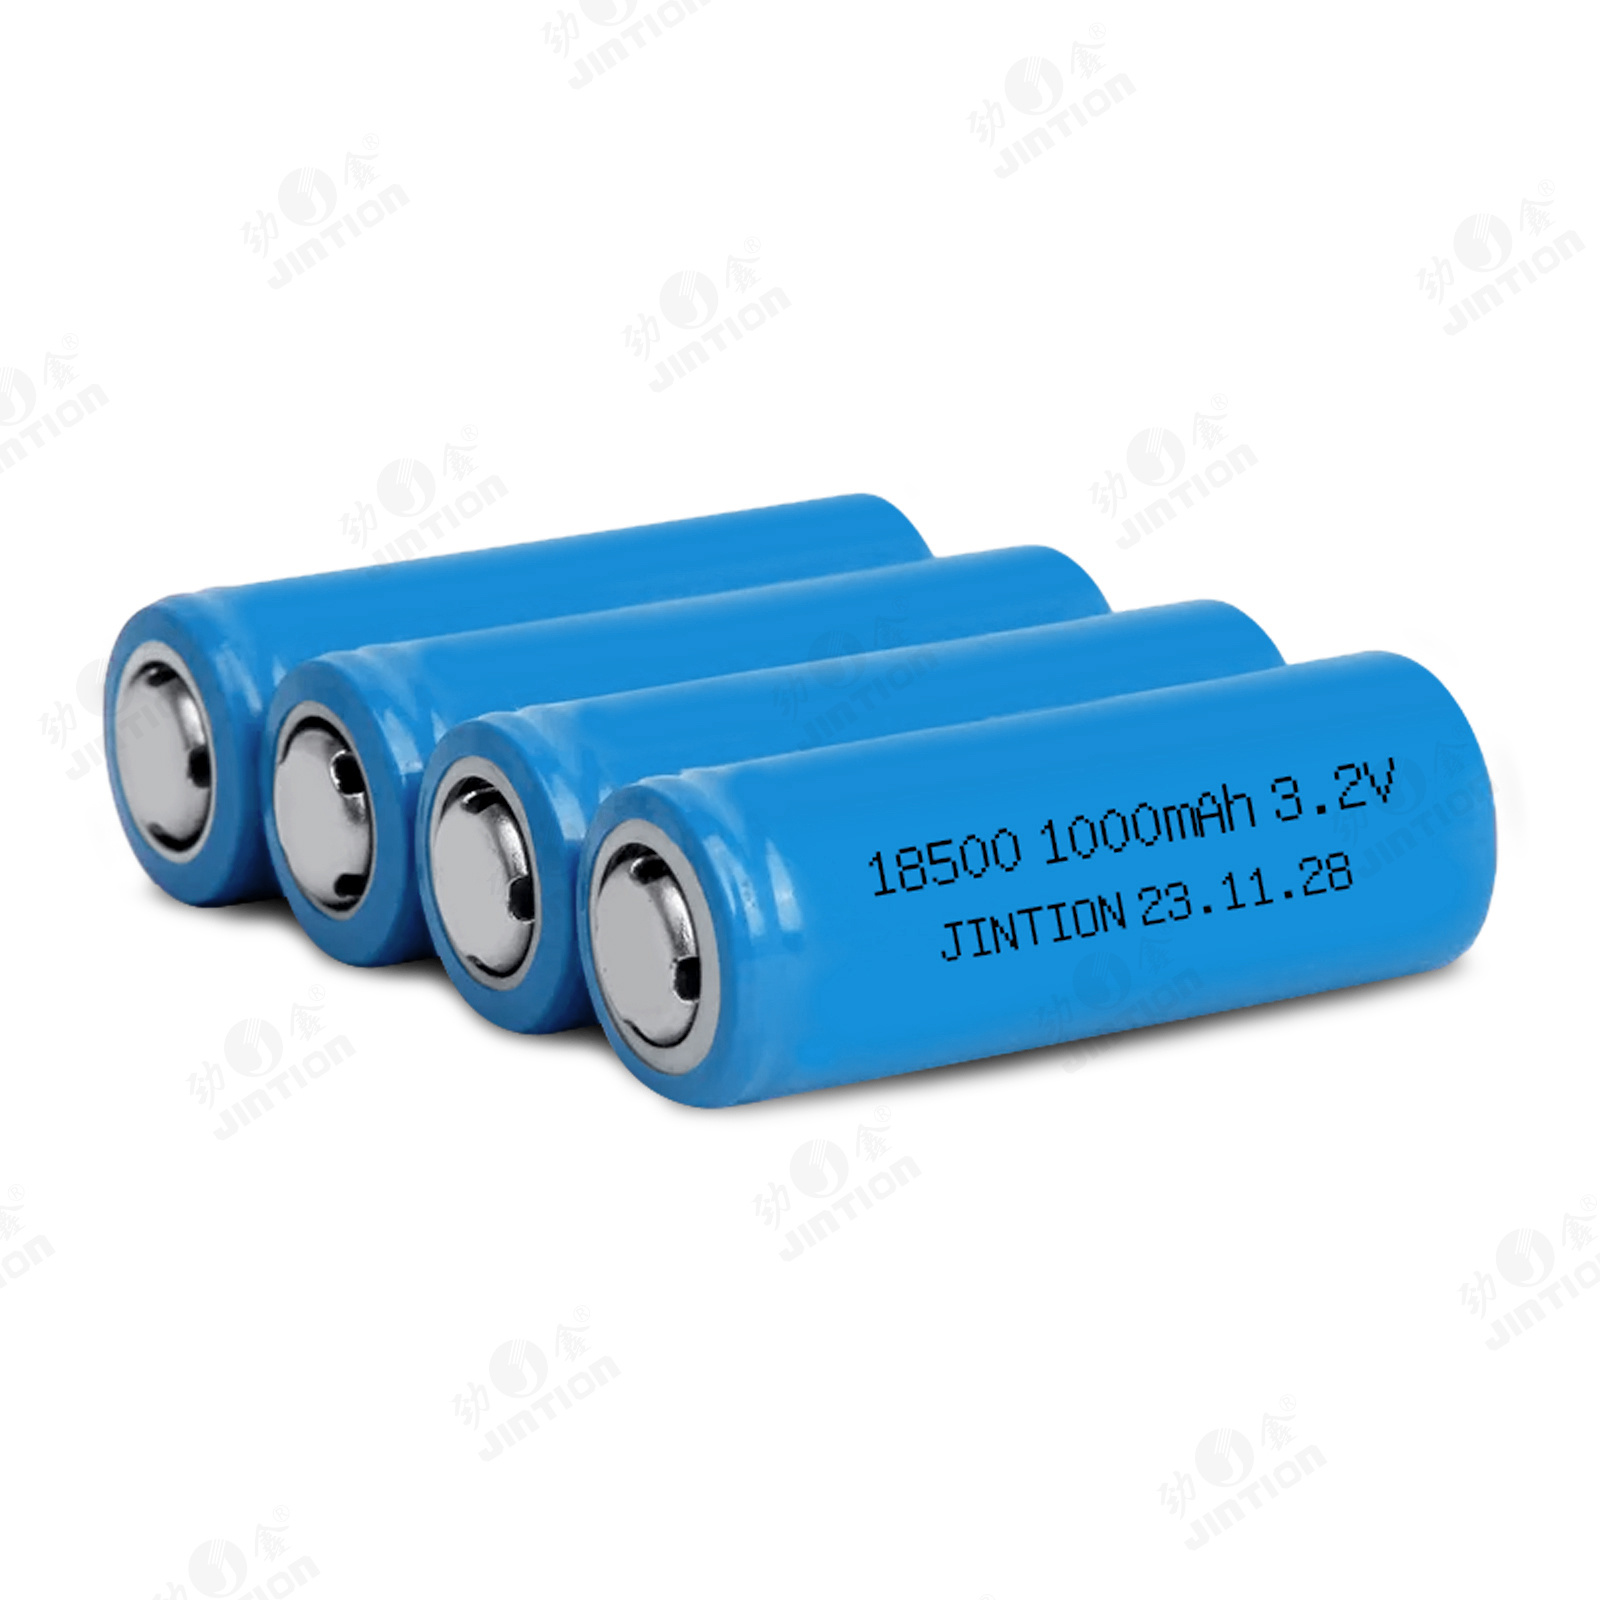 JINTION 18500 1000mAh 3.2V cylindrical 18500 lithium ion battery cell lithium ion 3.2v lithium ion batteries